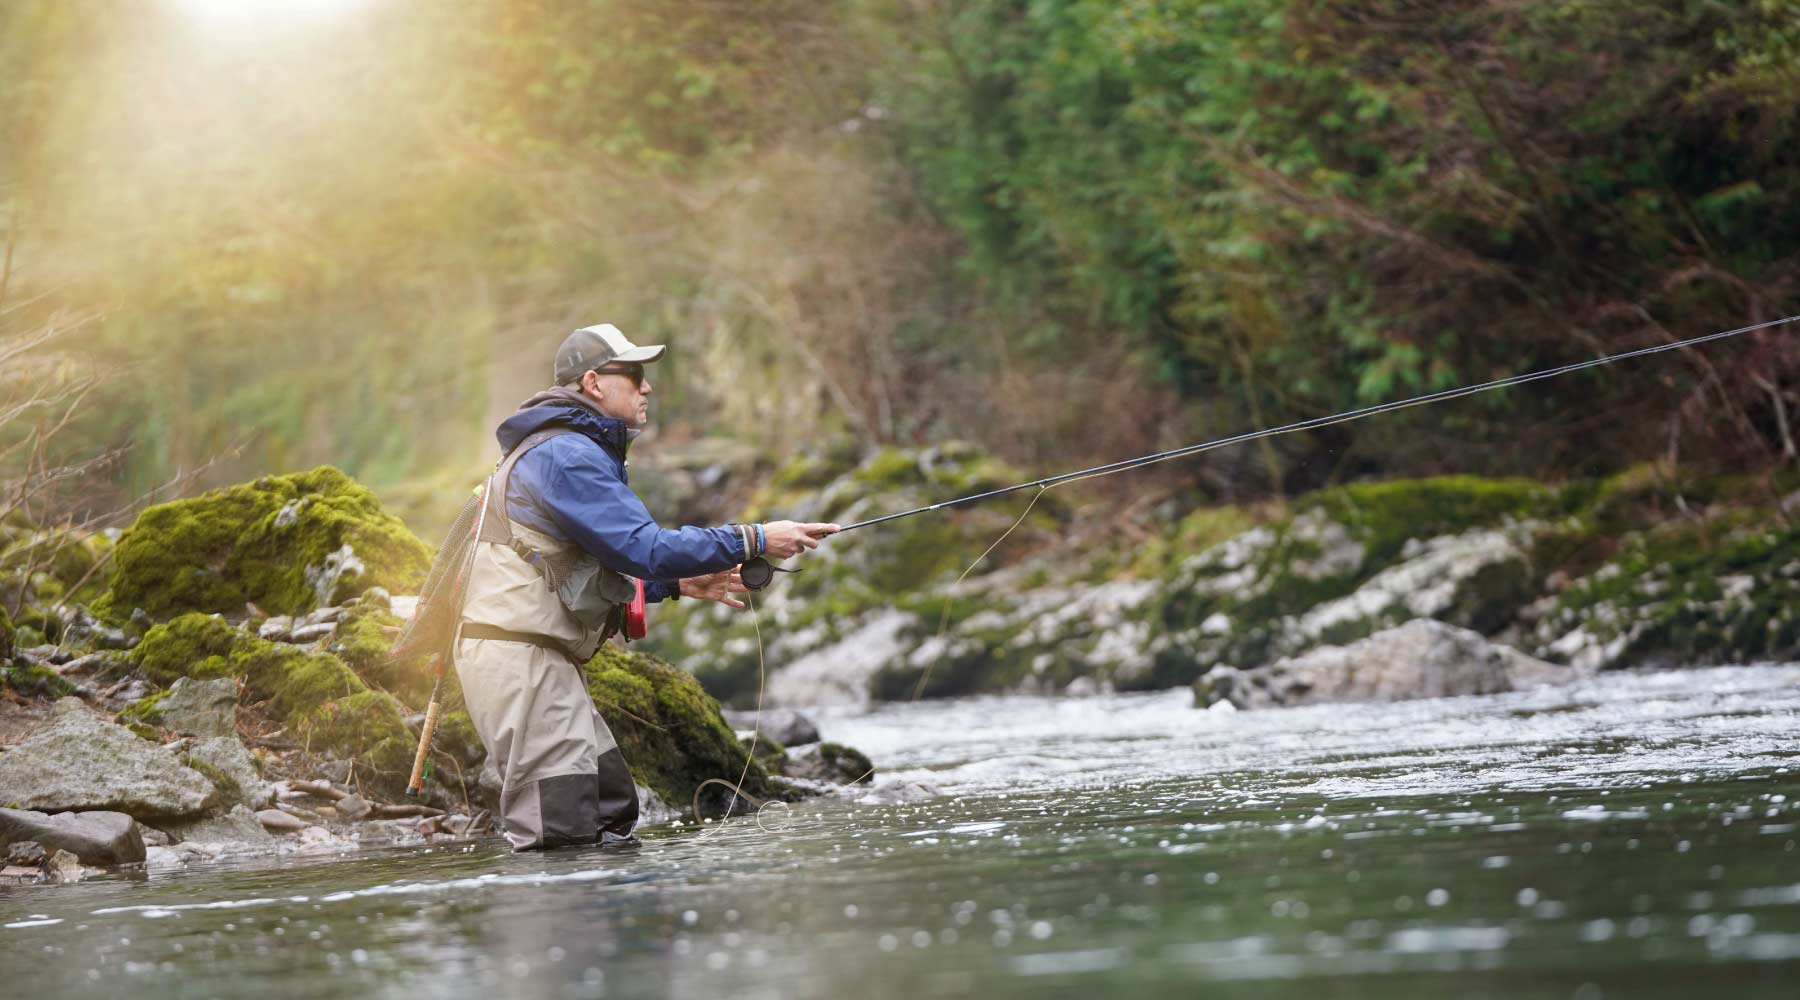 Is Fly Fishing Fun? Discover the Thrill and Joy of Fly Fishing